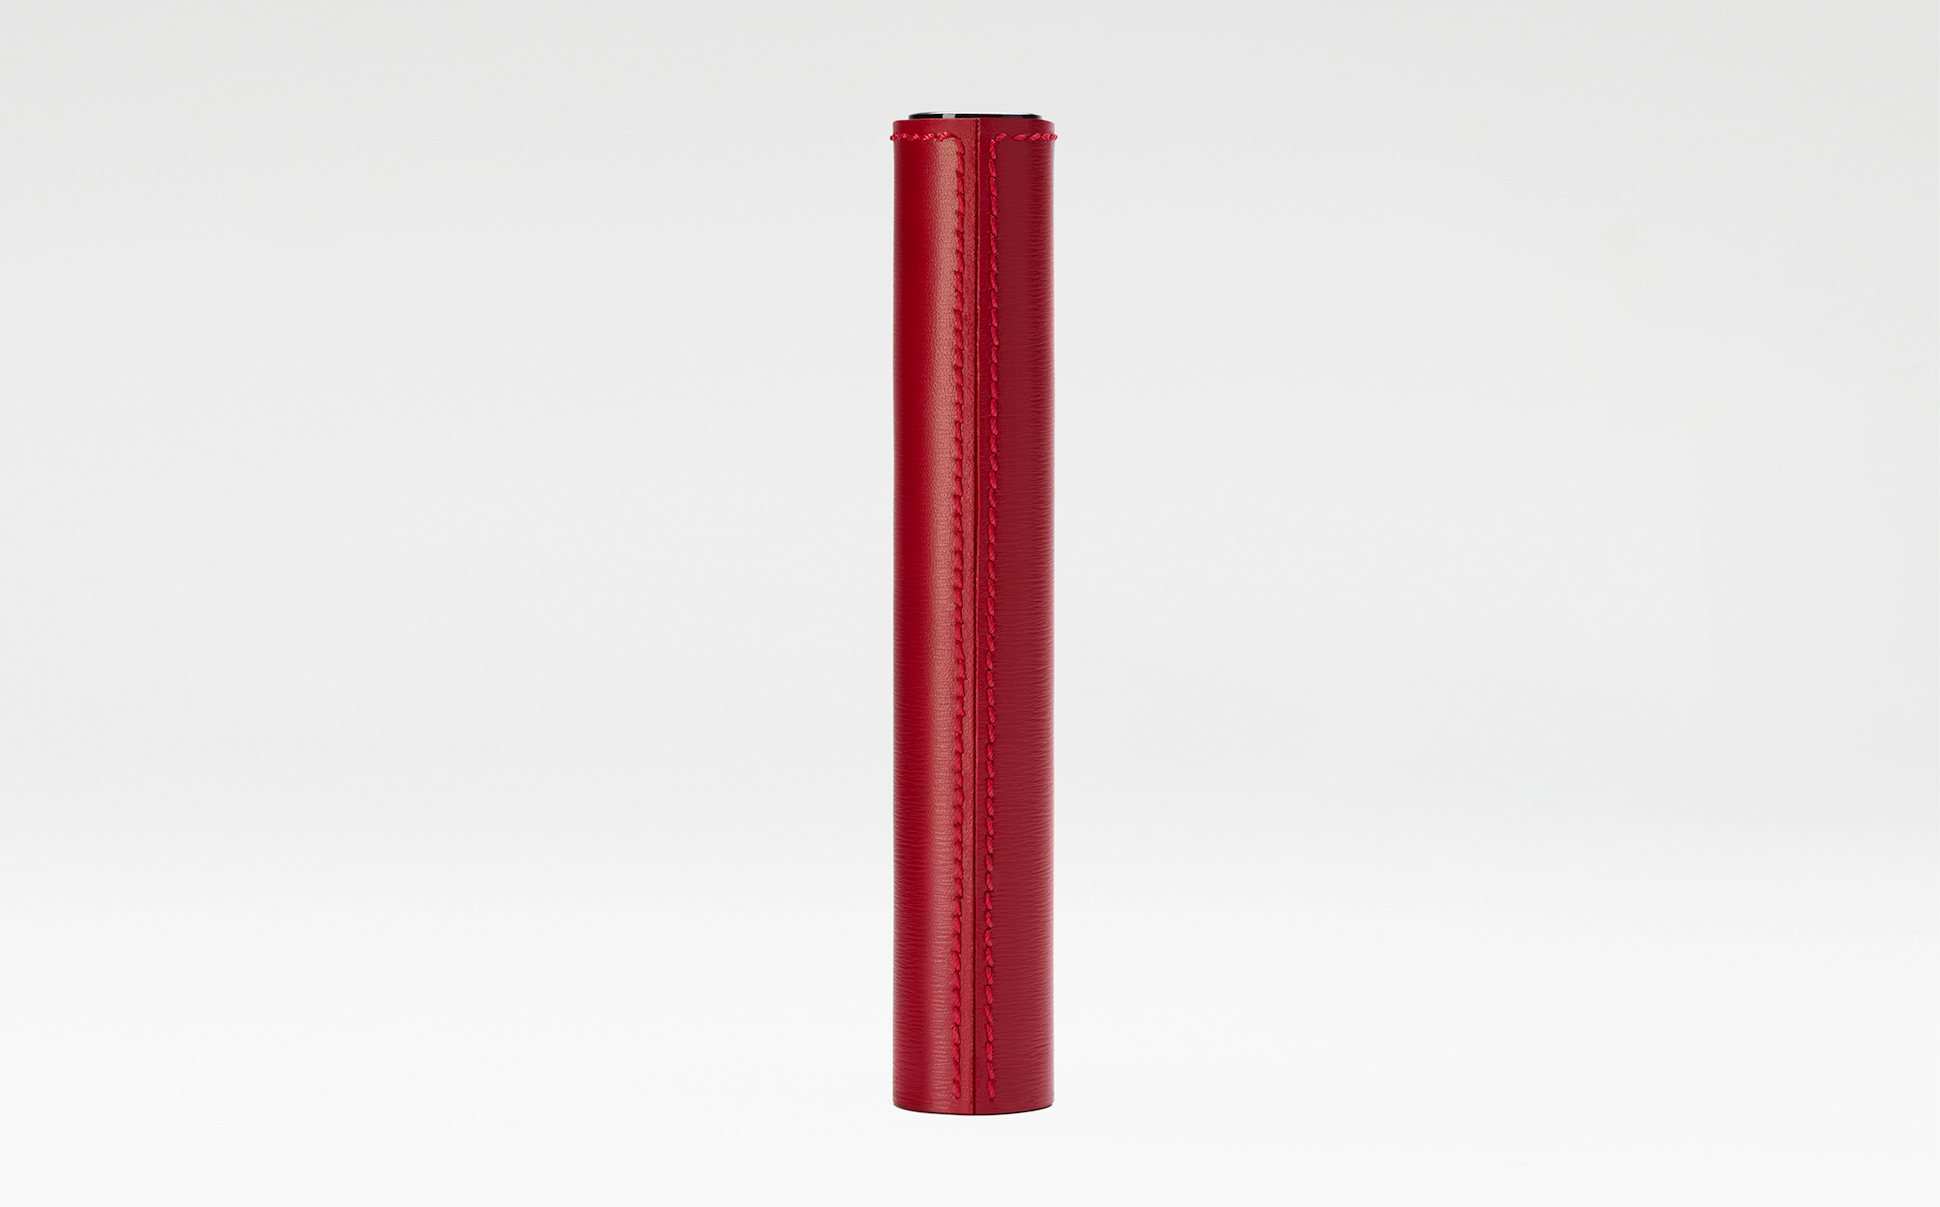 La bouche rouge Red leather sleeve with stitches - back